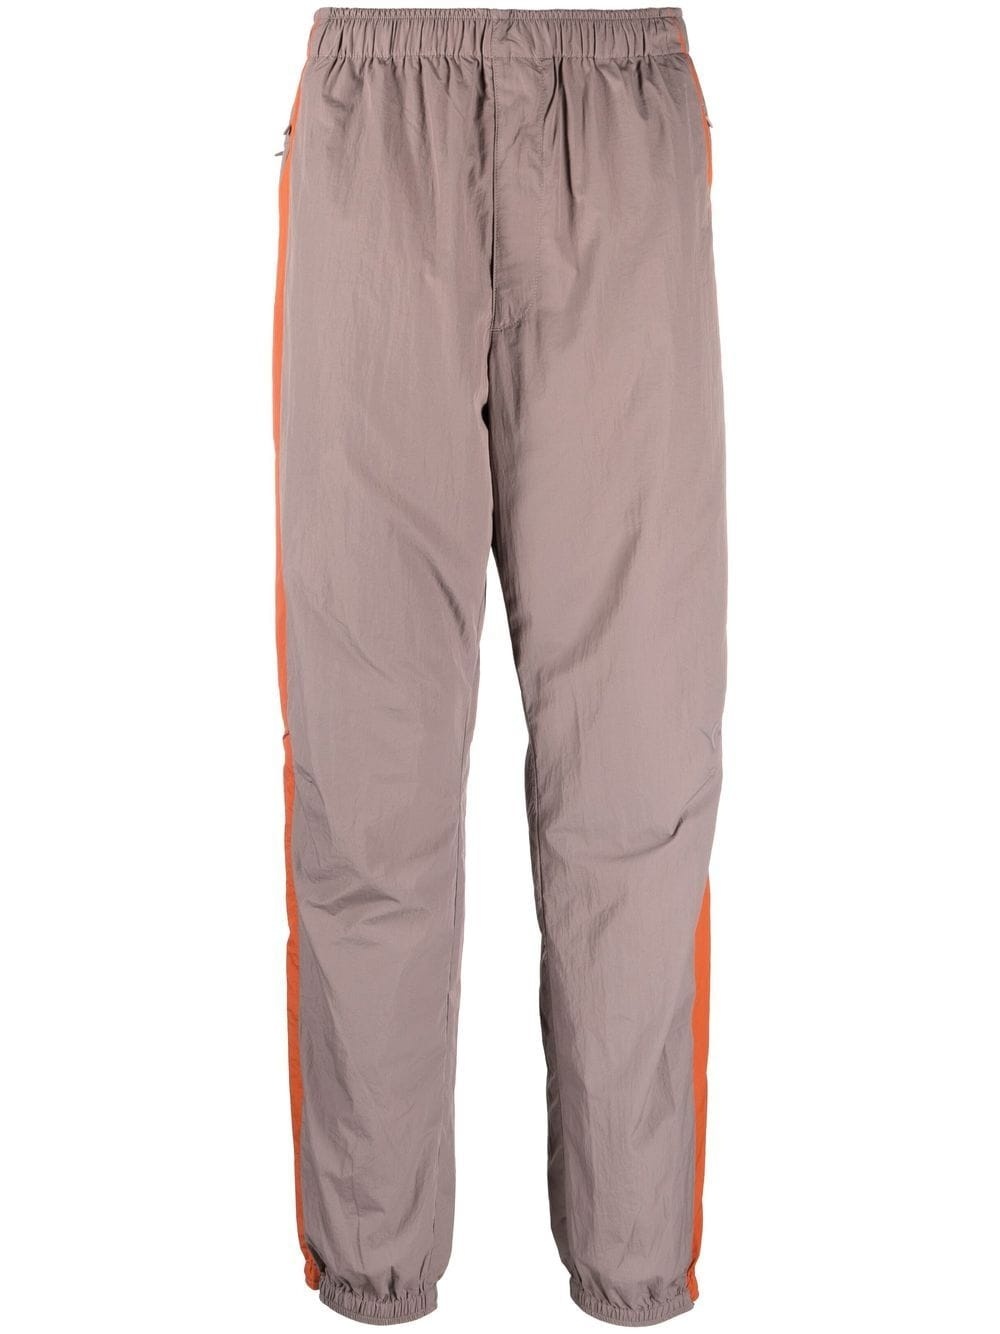 Y-3 elasticated two-tone track pants | REVERSIBLE